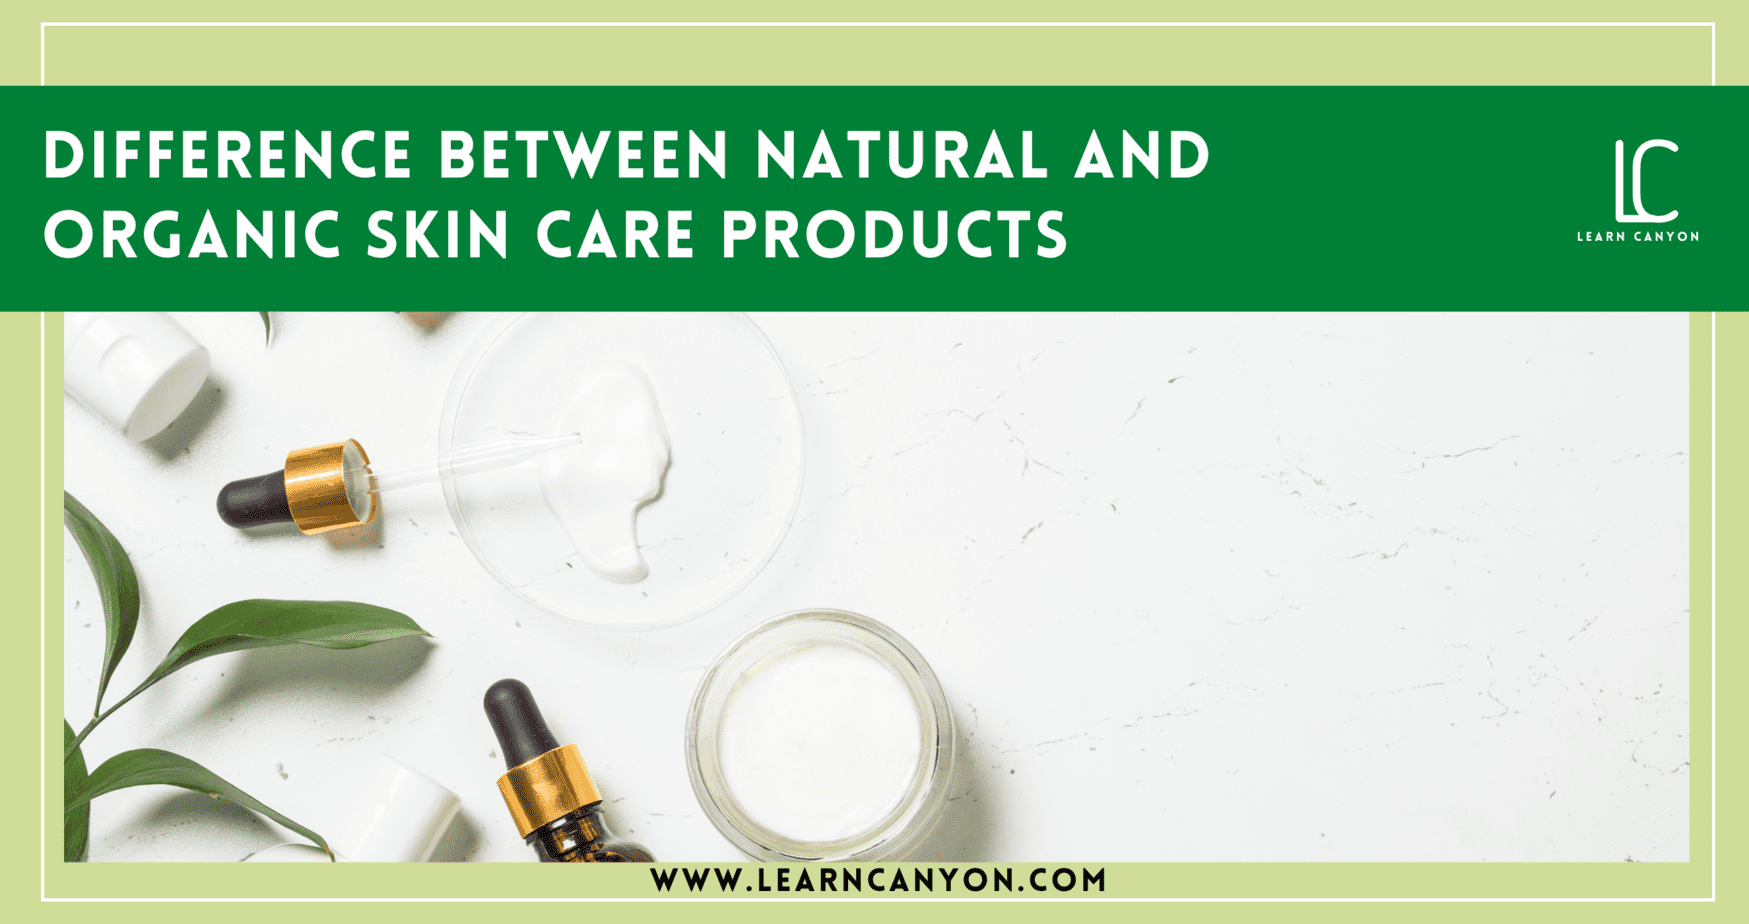 The difference between organic and natural skincare